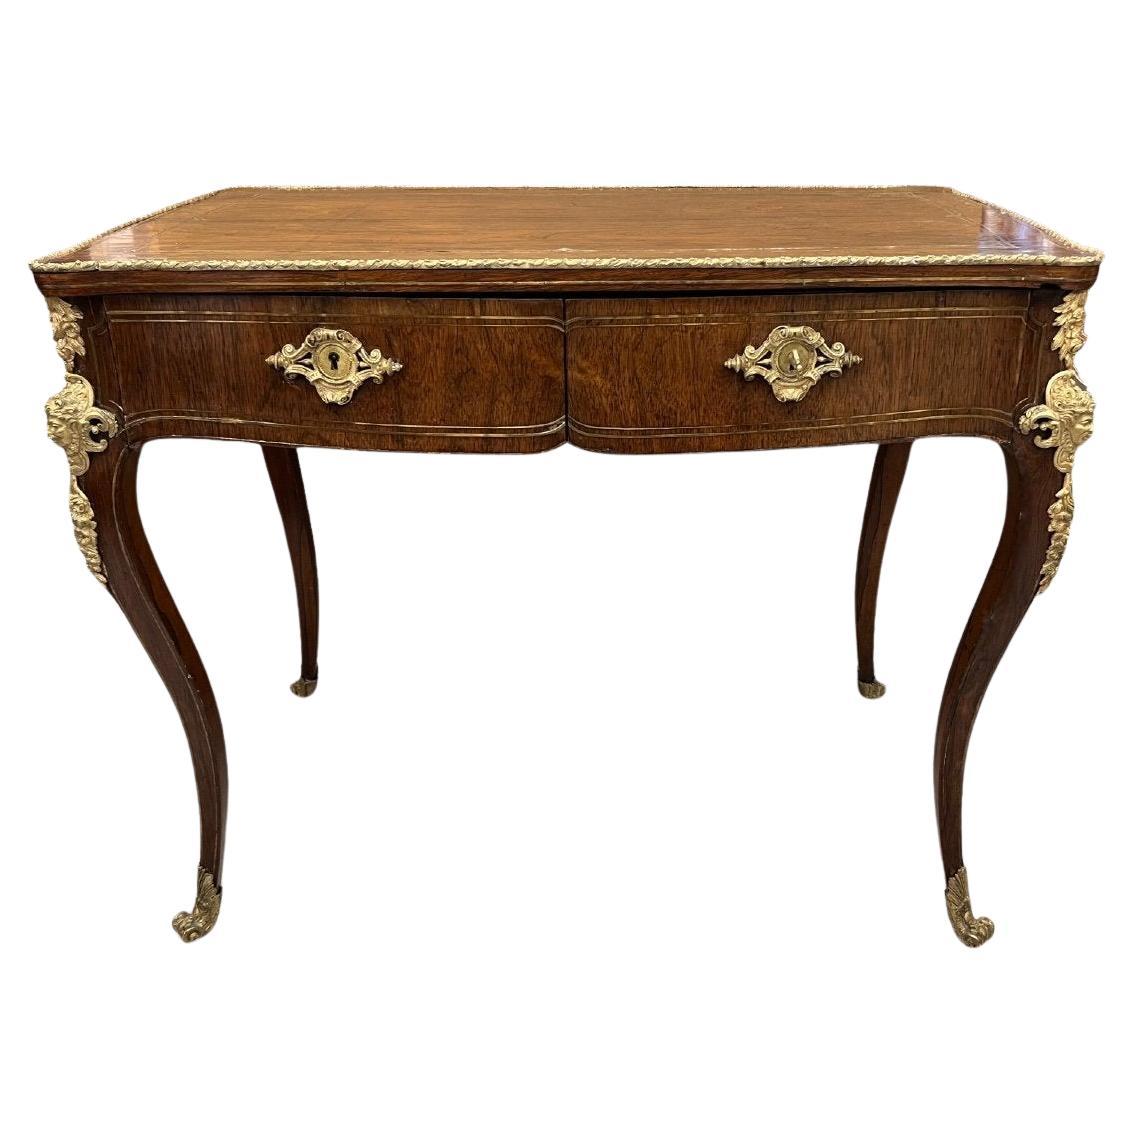 19th Century Transition-Style Writing Desk from the Napoleon III Period For Sale